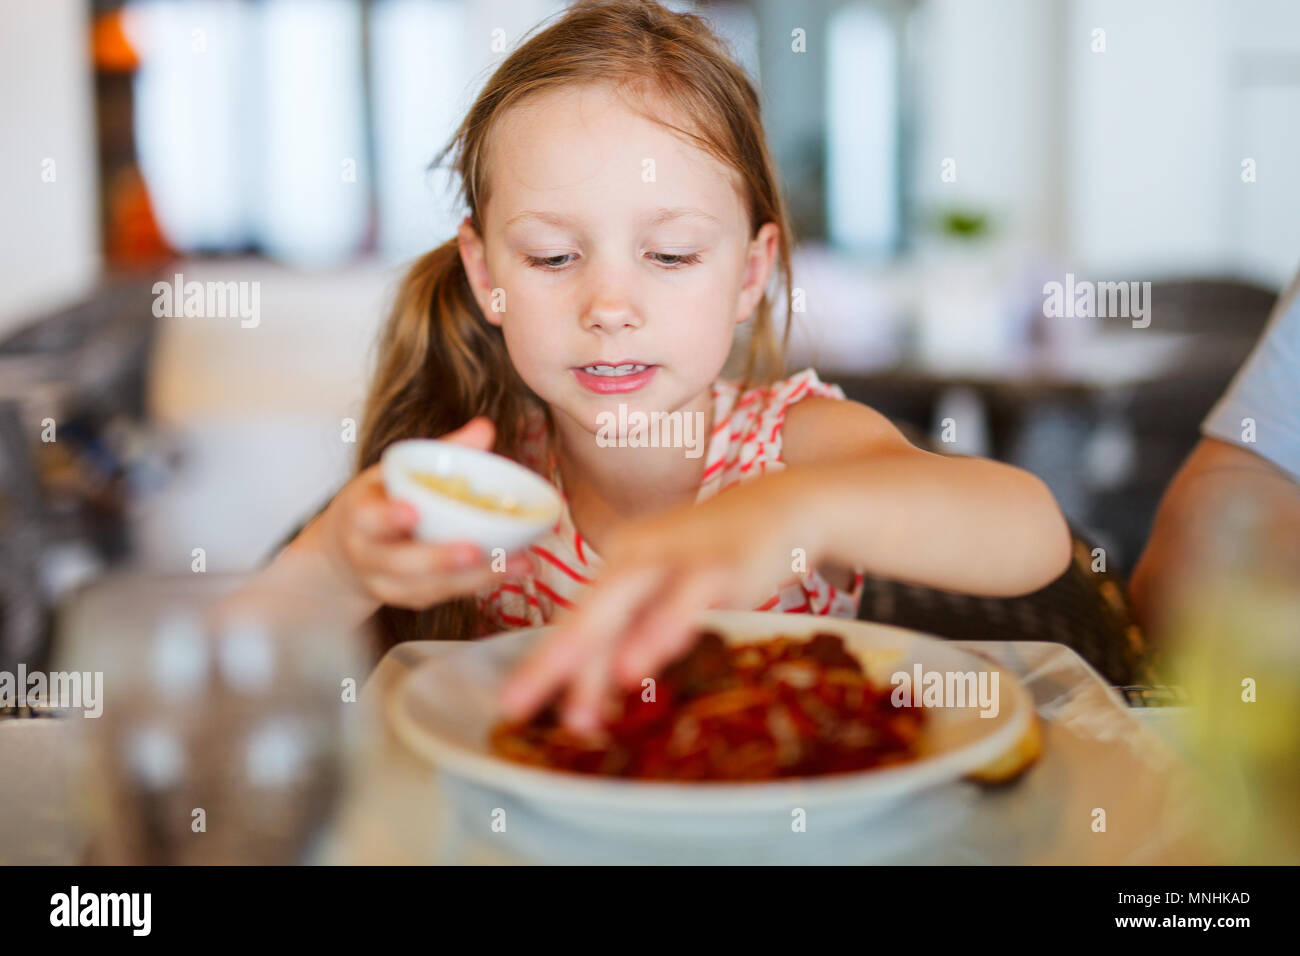 Portrait of adorable little girl eating lunch at restaurant Stock Photo